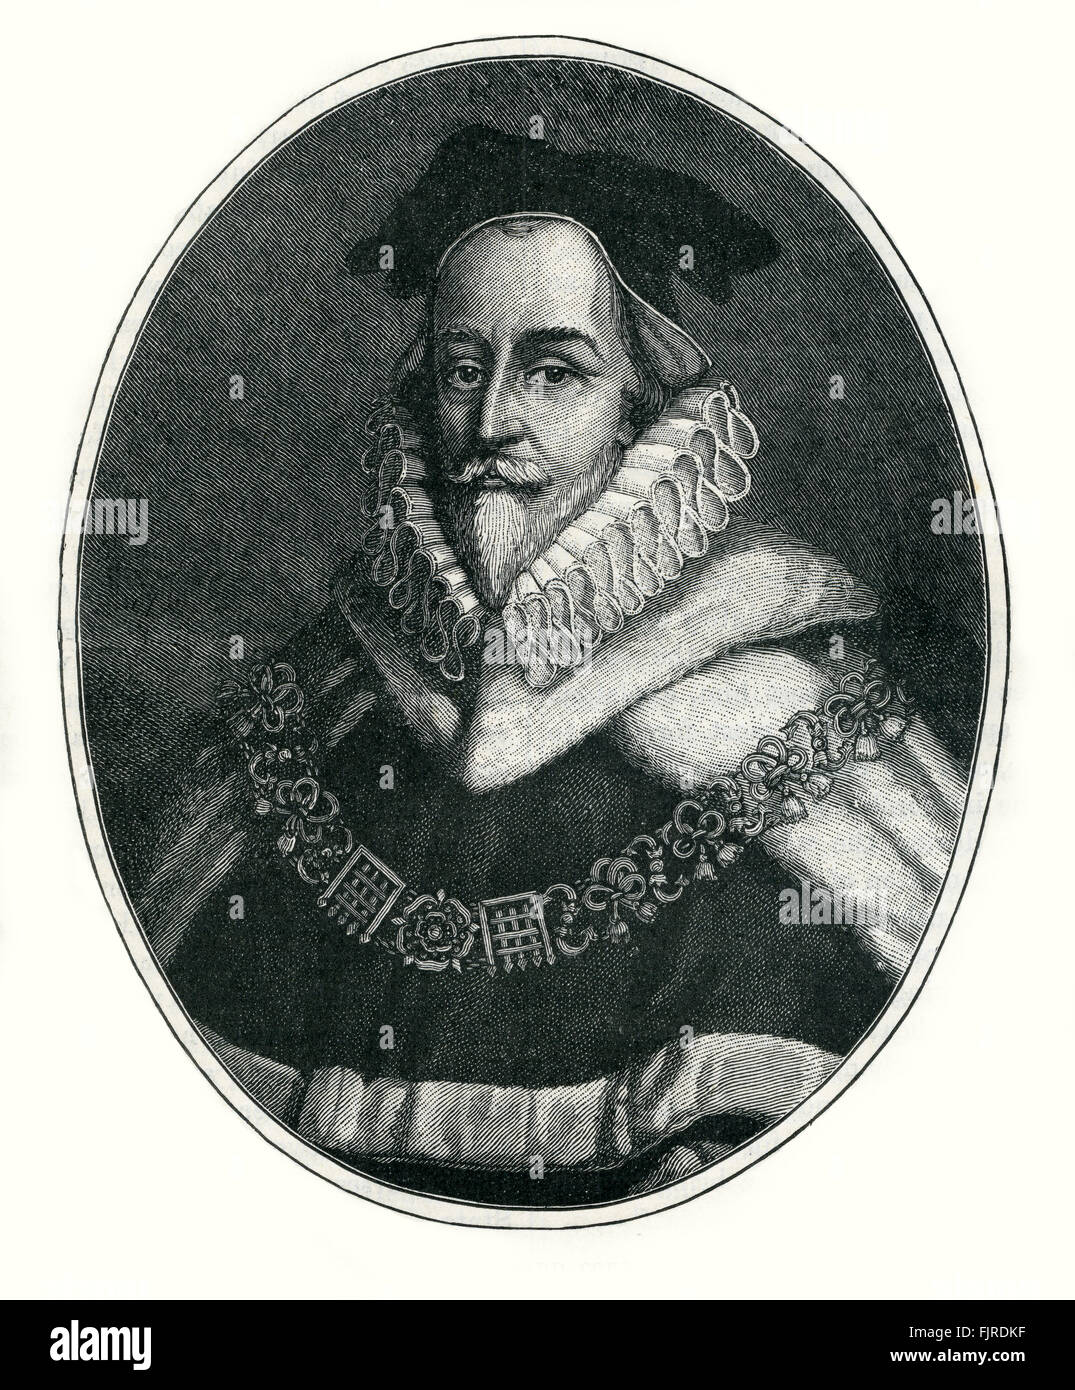 Sir Edward Coke (1552 – 1634), English barrister, judge and opposition politician. Wrote the Statute of Monopolies, 1624, and was instrumental in the passage of the Petition of Right, 1628. Stock Photo